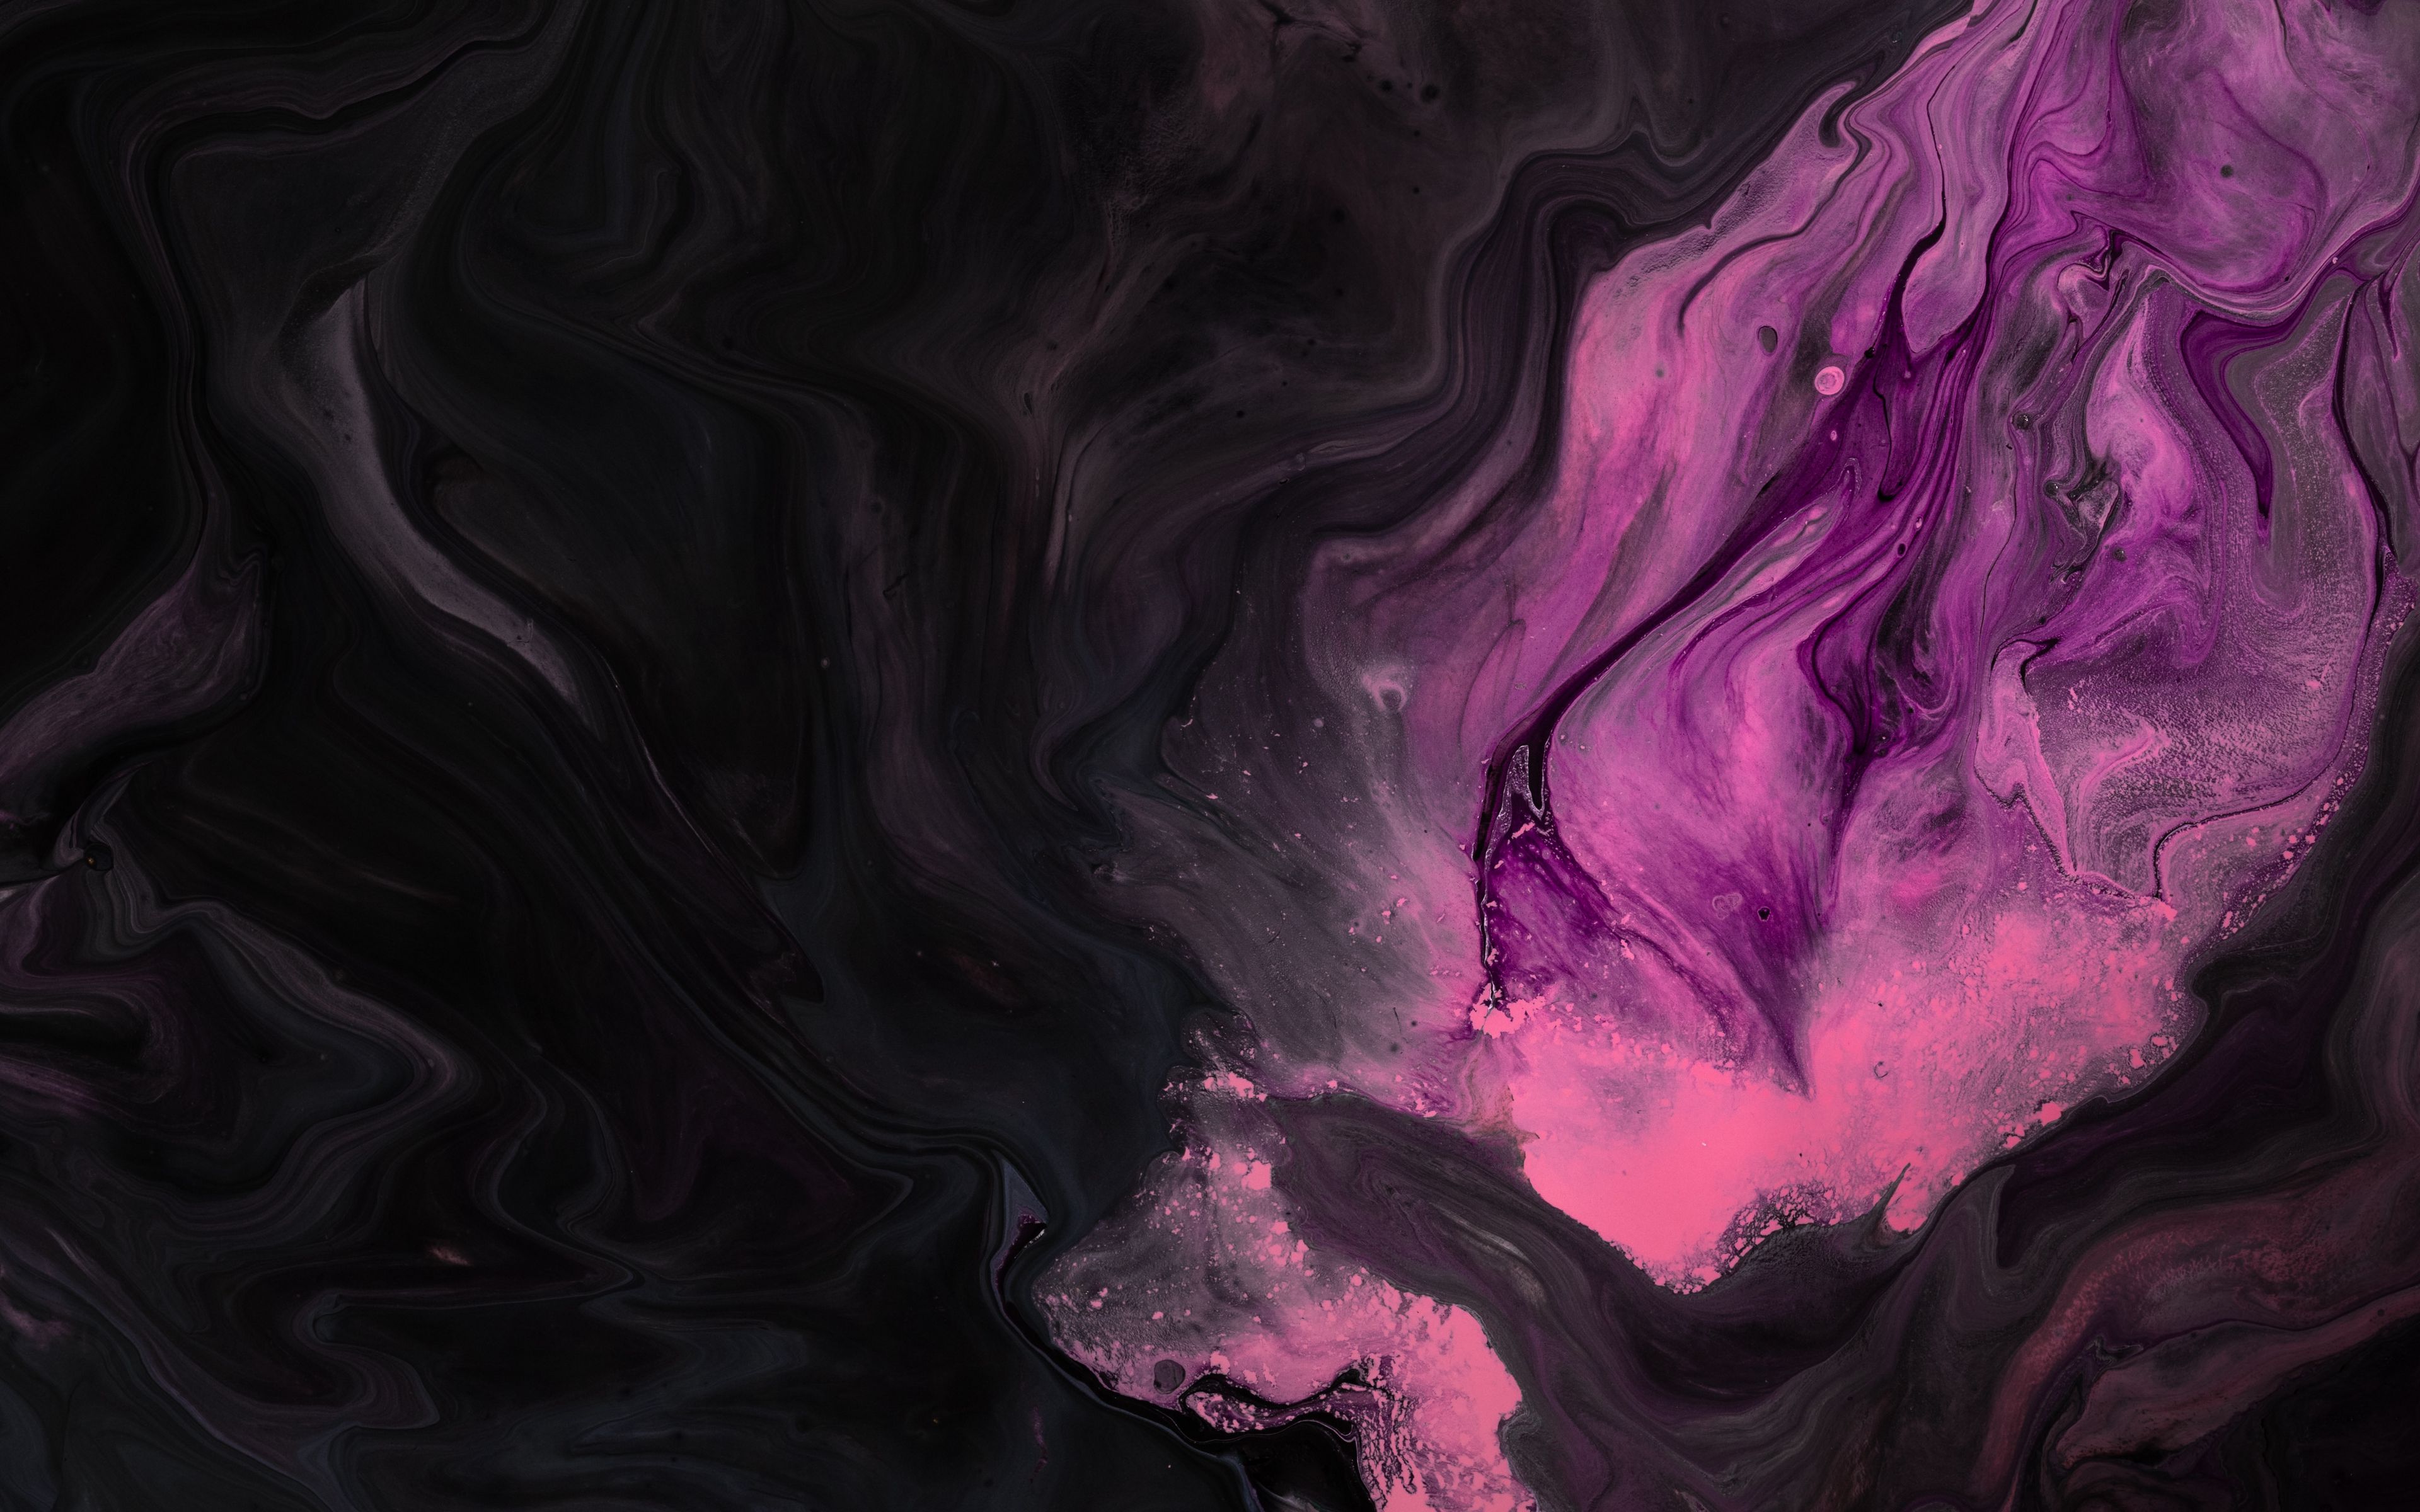 Download wallpaper 3840x2400 paint, stains, pink, black, liquid 4k ultra HD 16:10 HD background